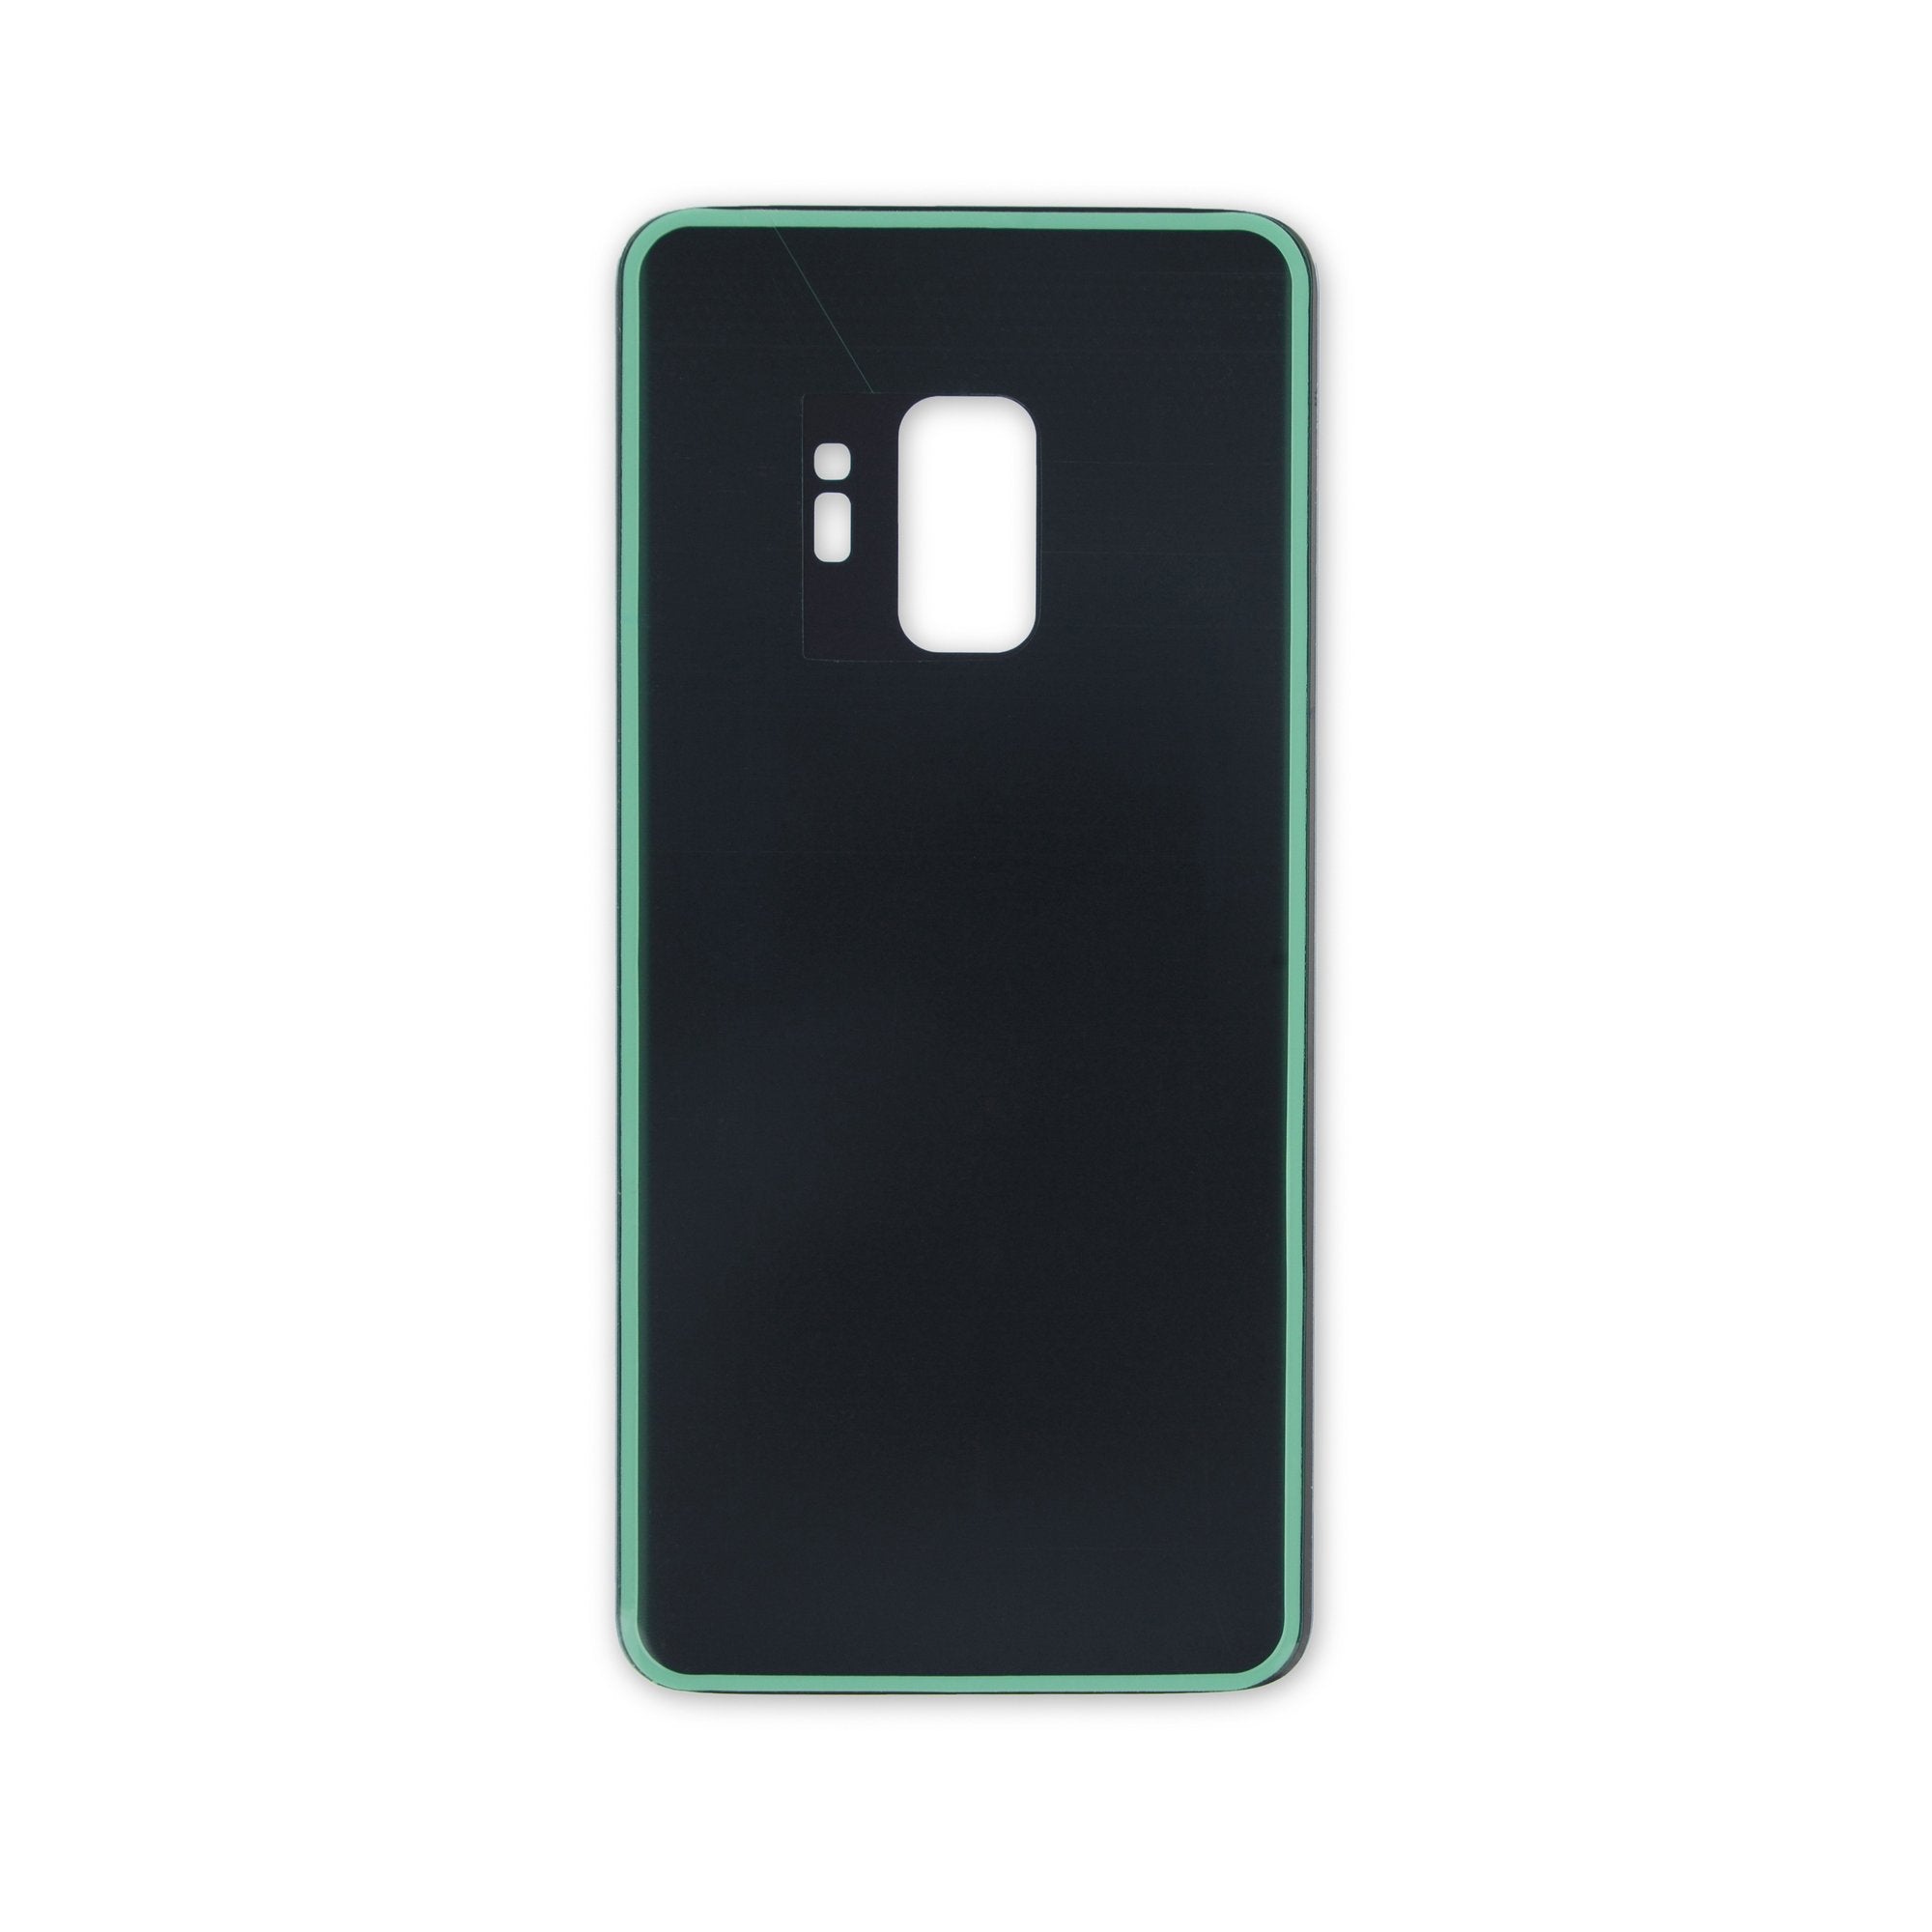 Galaxy S9 Rear Glass Panel/Cover Blue New